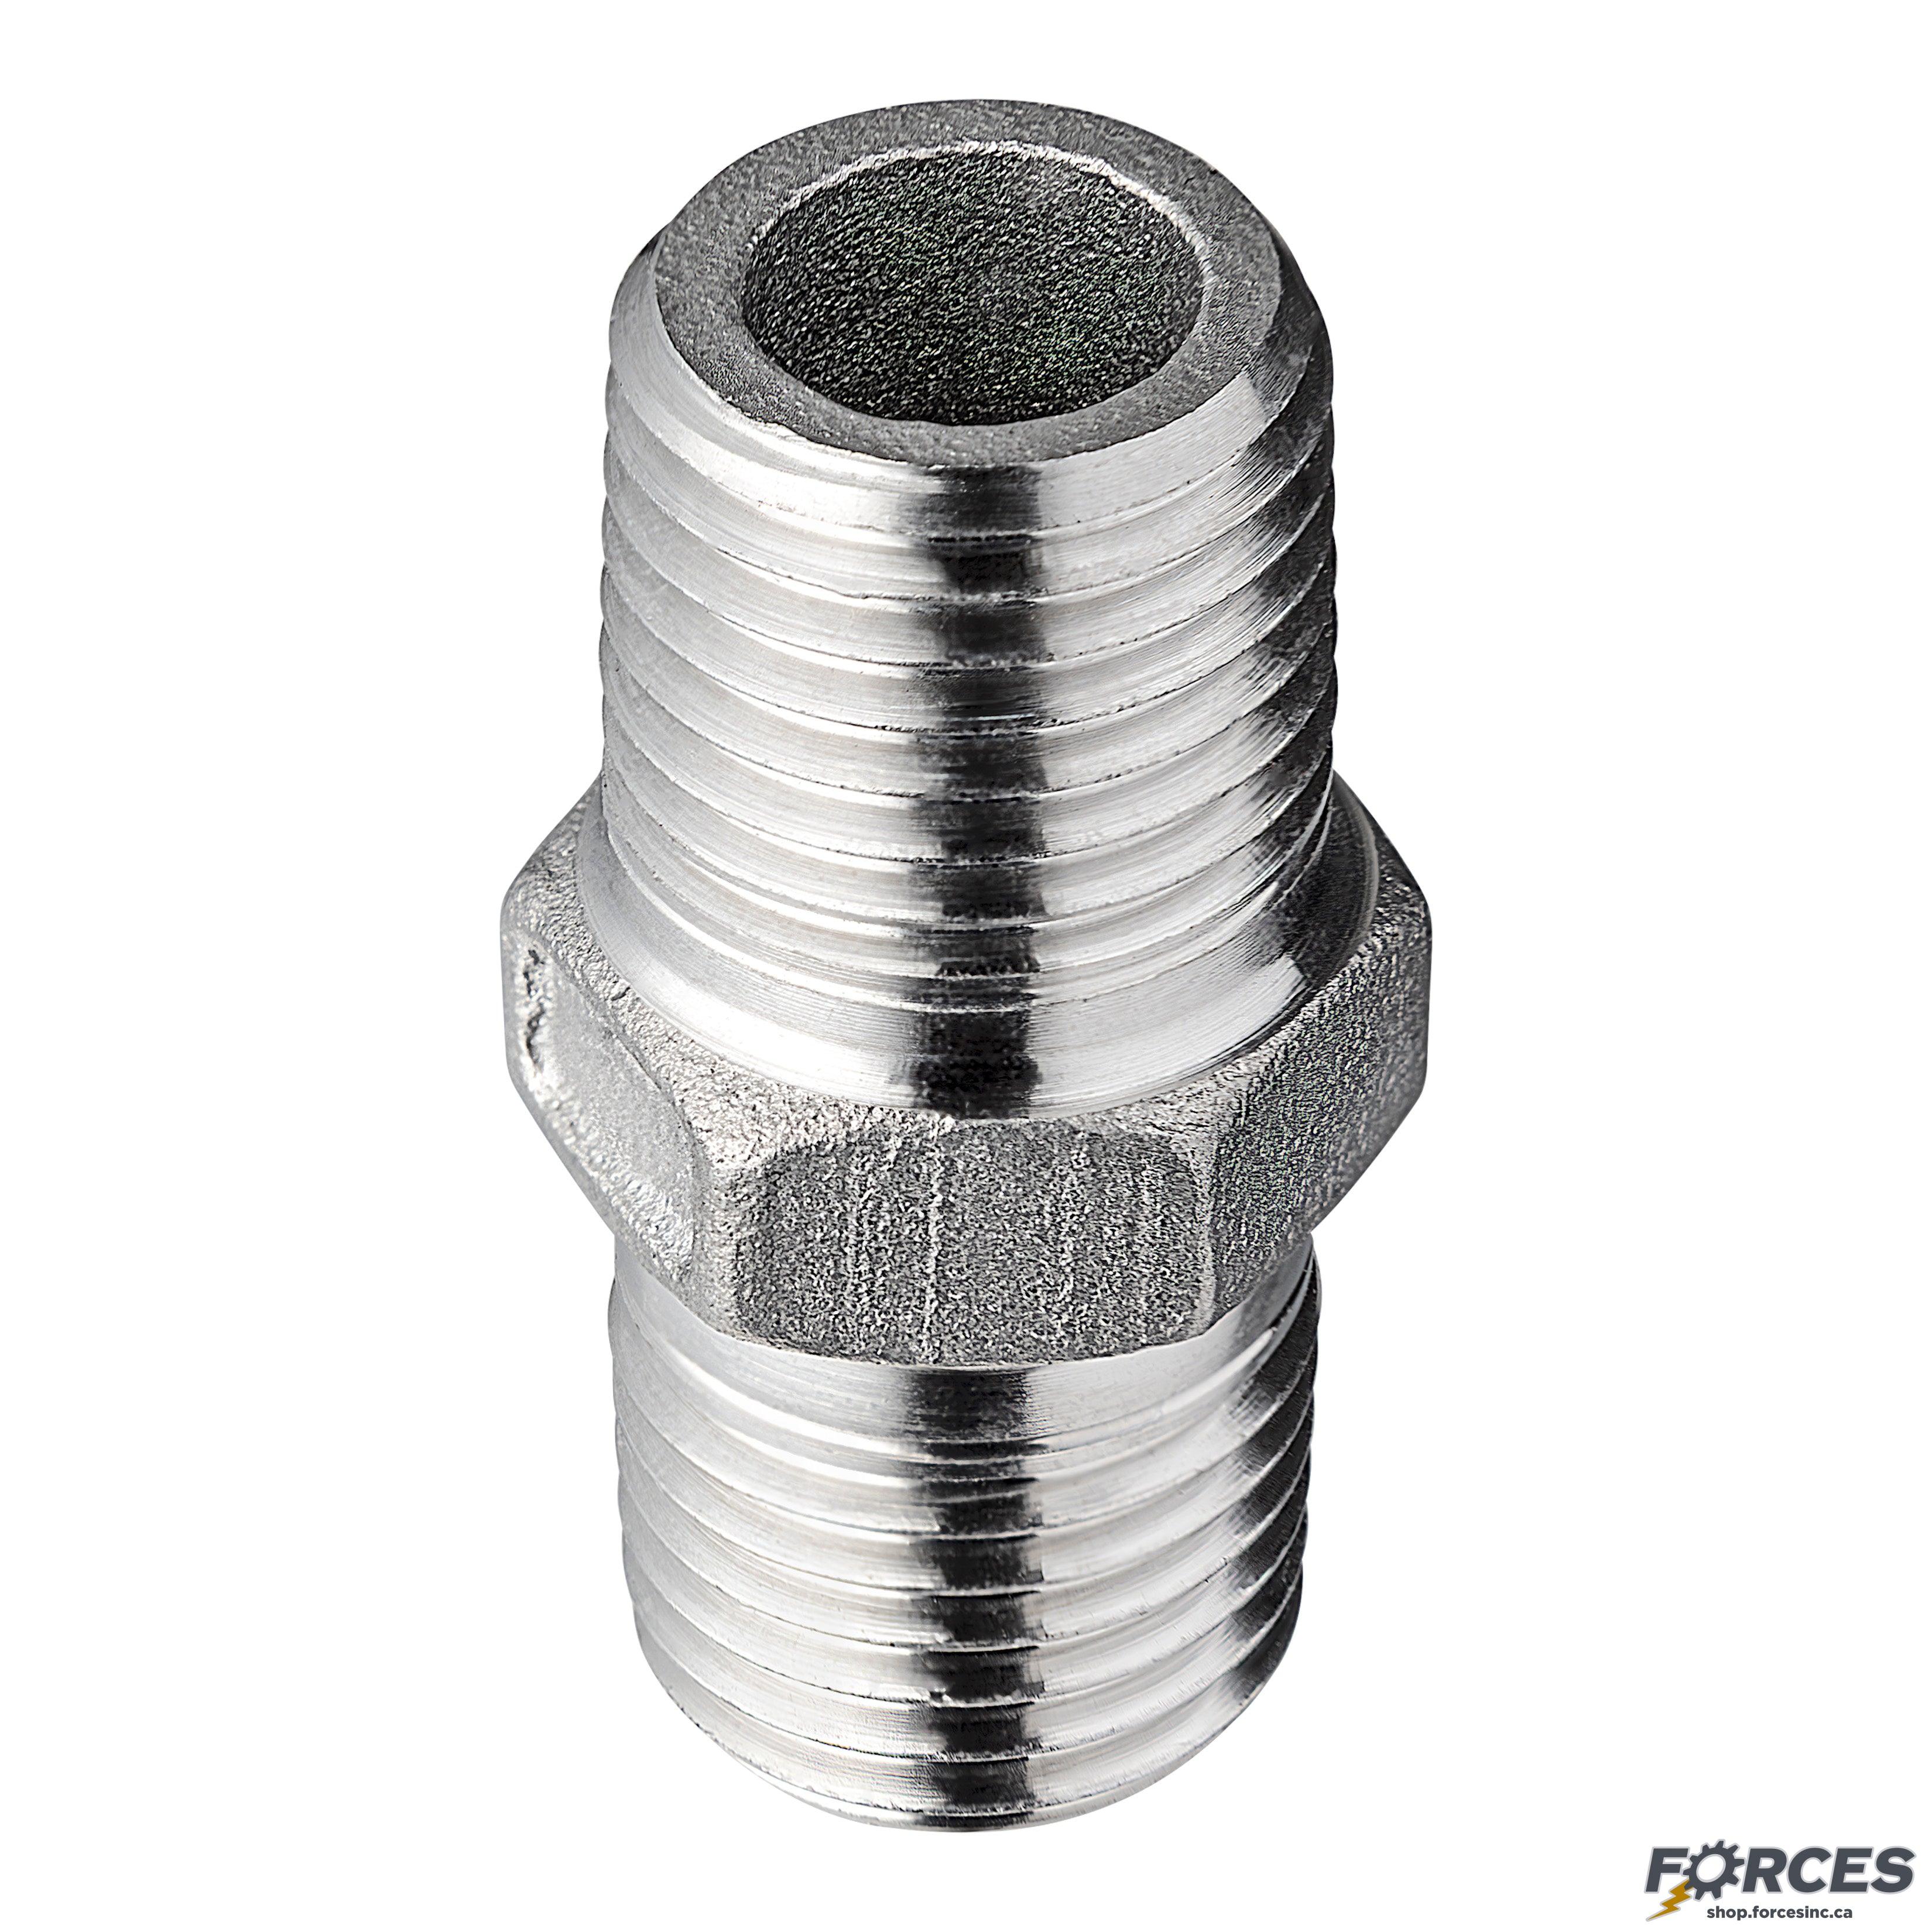 1-1/4" Hex Nipple - Stainless Steel 316 - Forces Inc